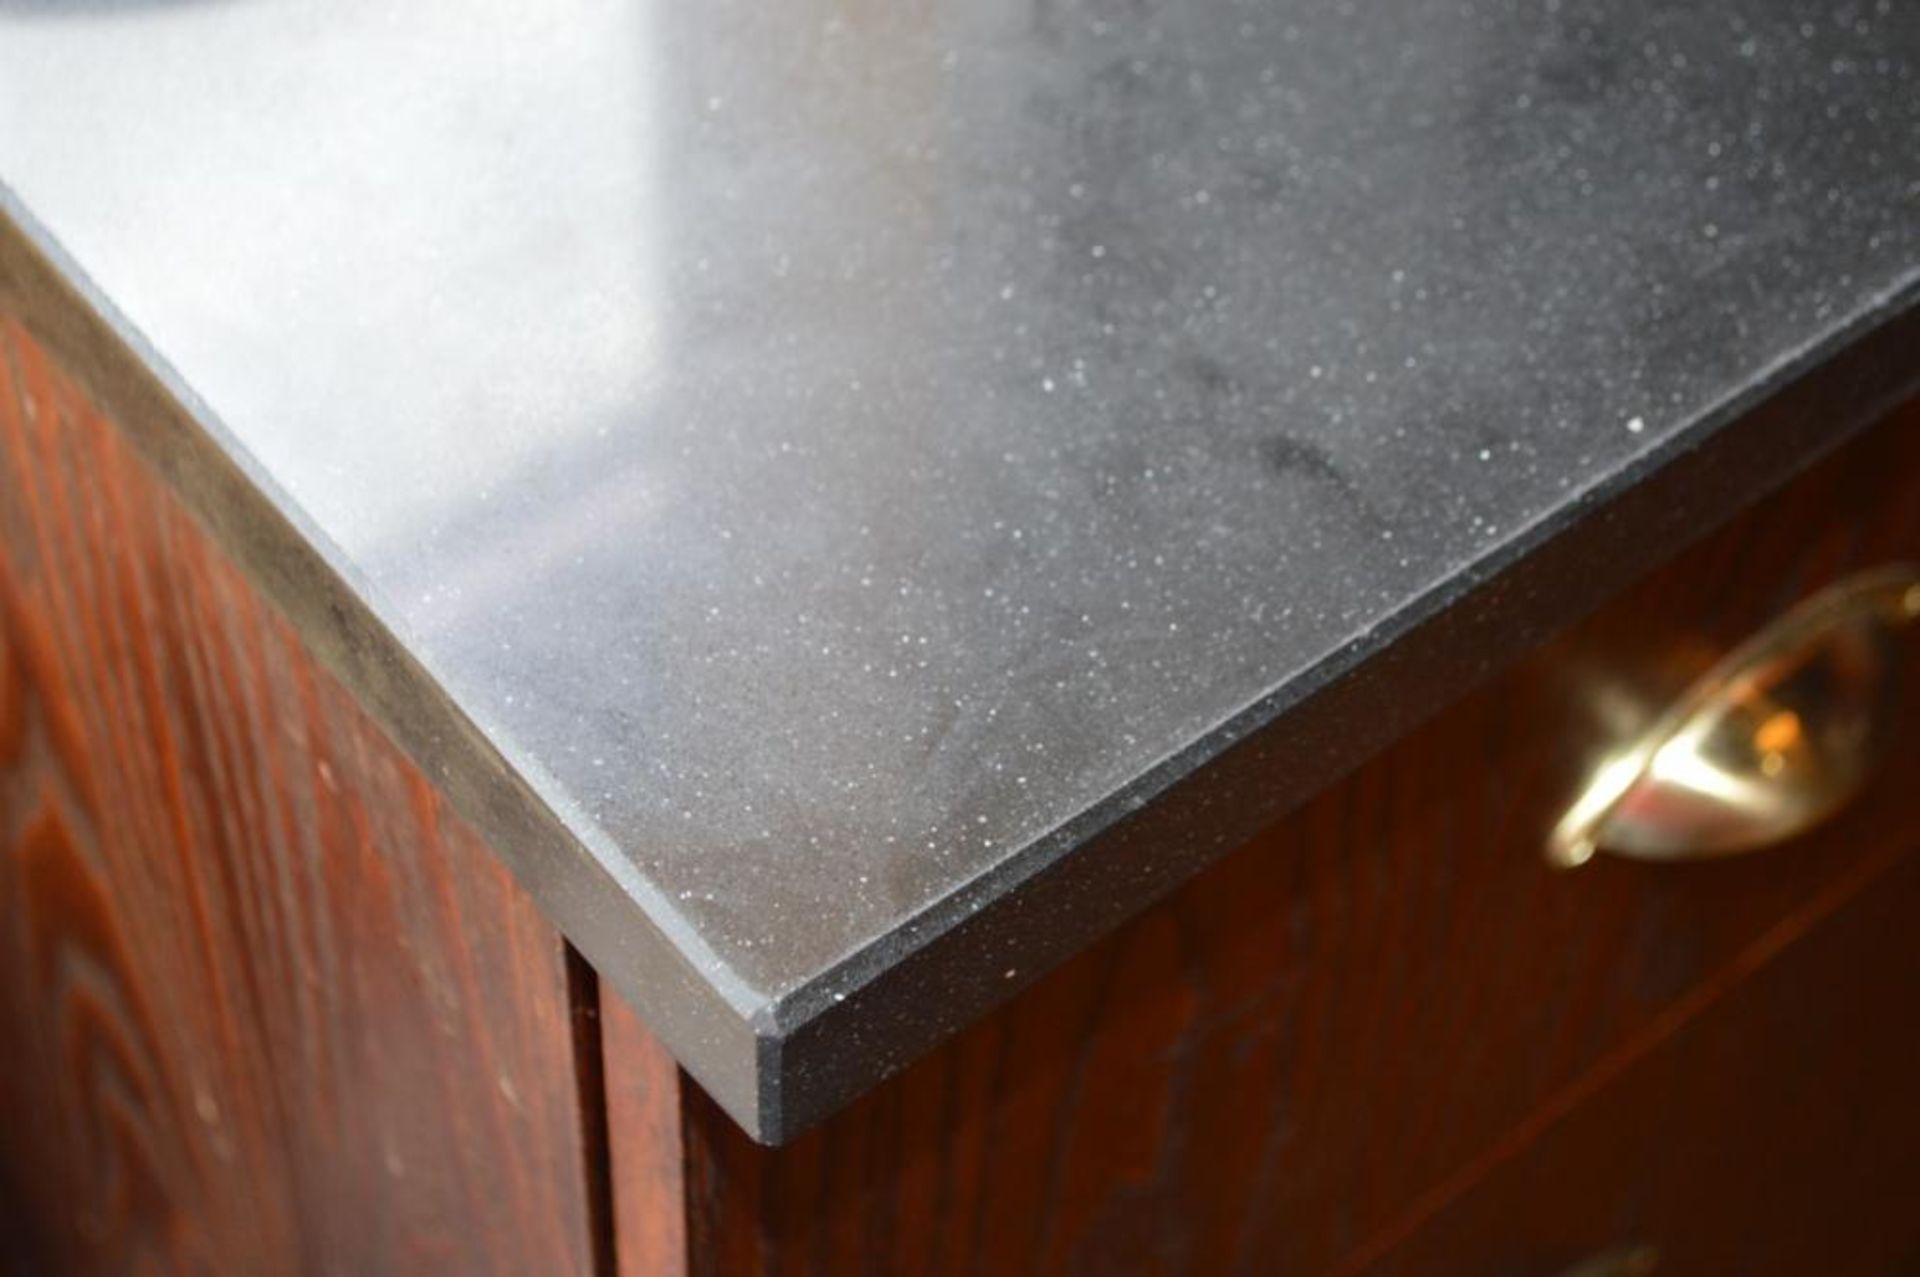 1 x Waitress Server Counter With Dark Wood Finish, Brass Hardware and Stone Top - H96 x W150 x D52 - Image 4 of 4